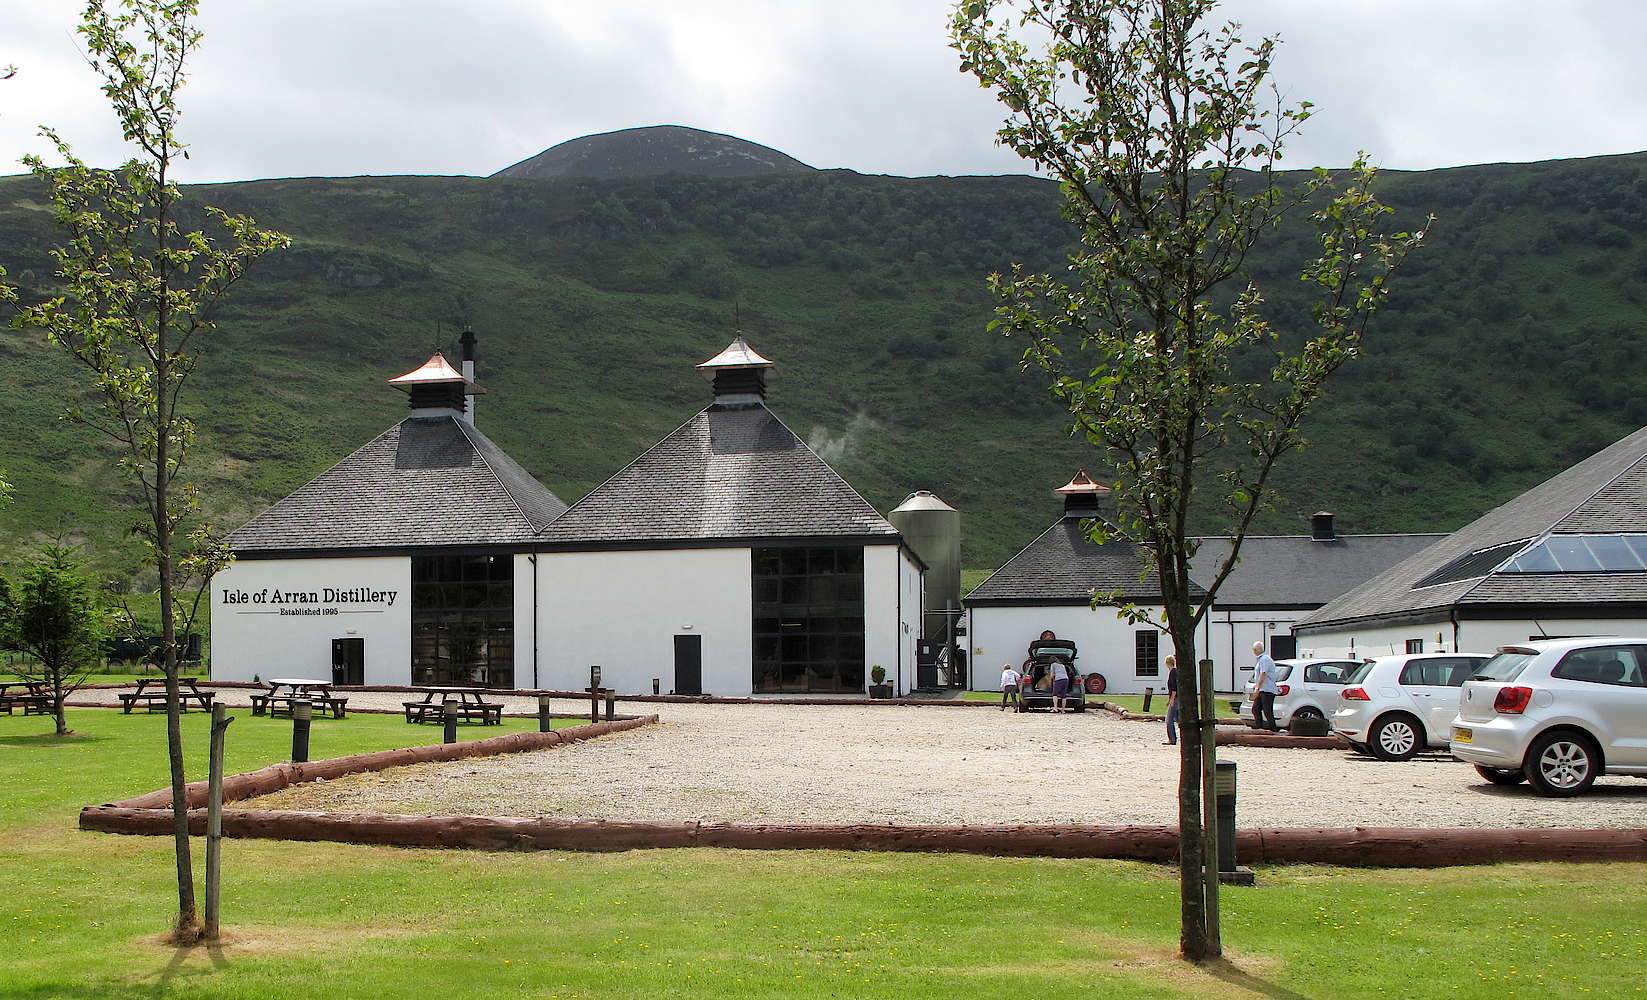 The Arran Distillery on the Isle of Arran has been producing some excellent whisky since 1995 including a single cask 15 years old from Mizunara The Shop in Hong Kong.